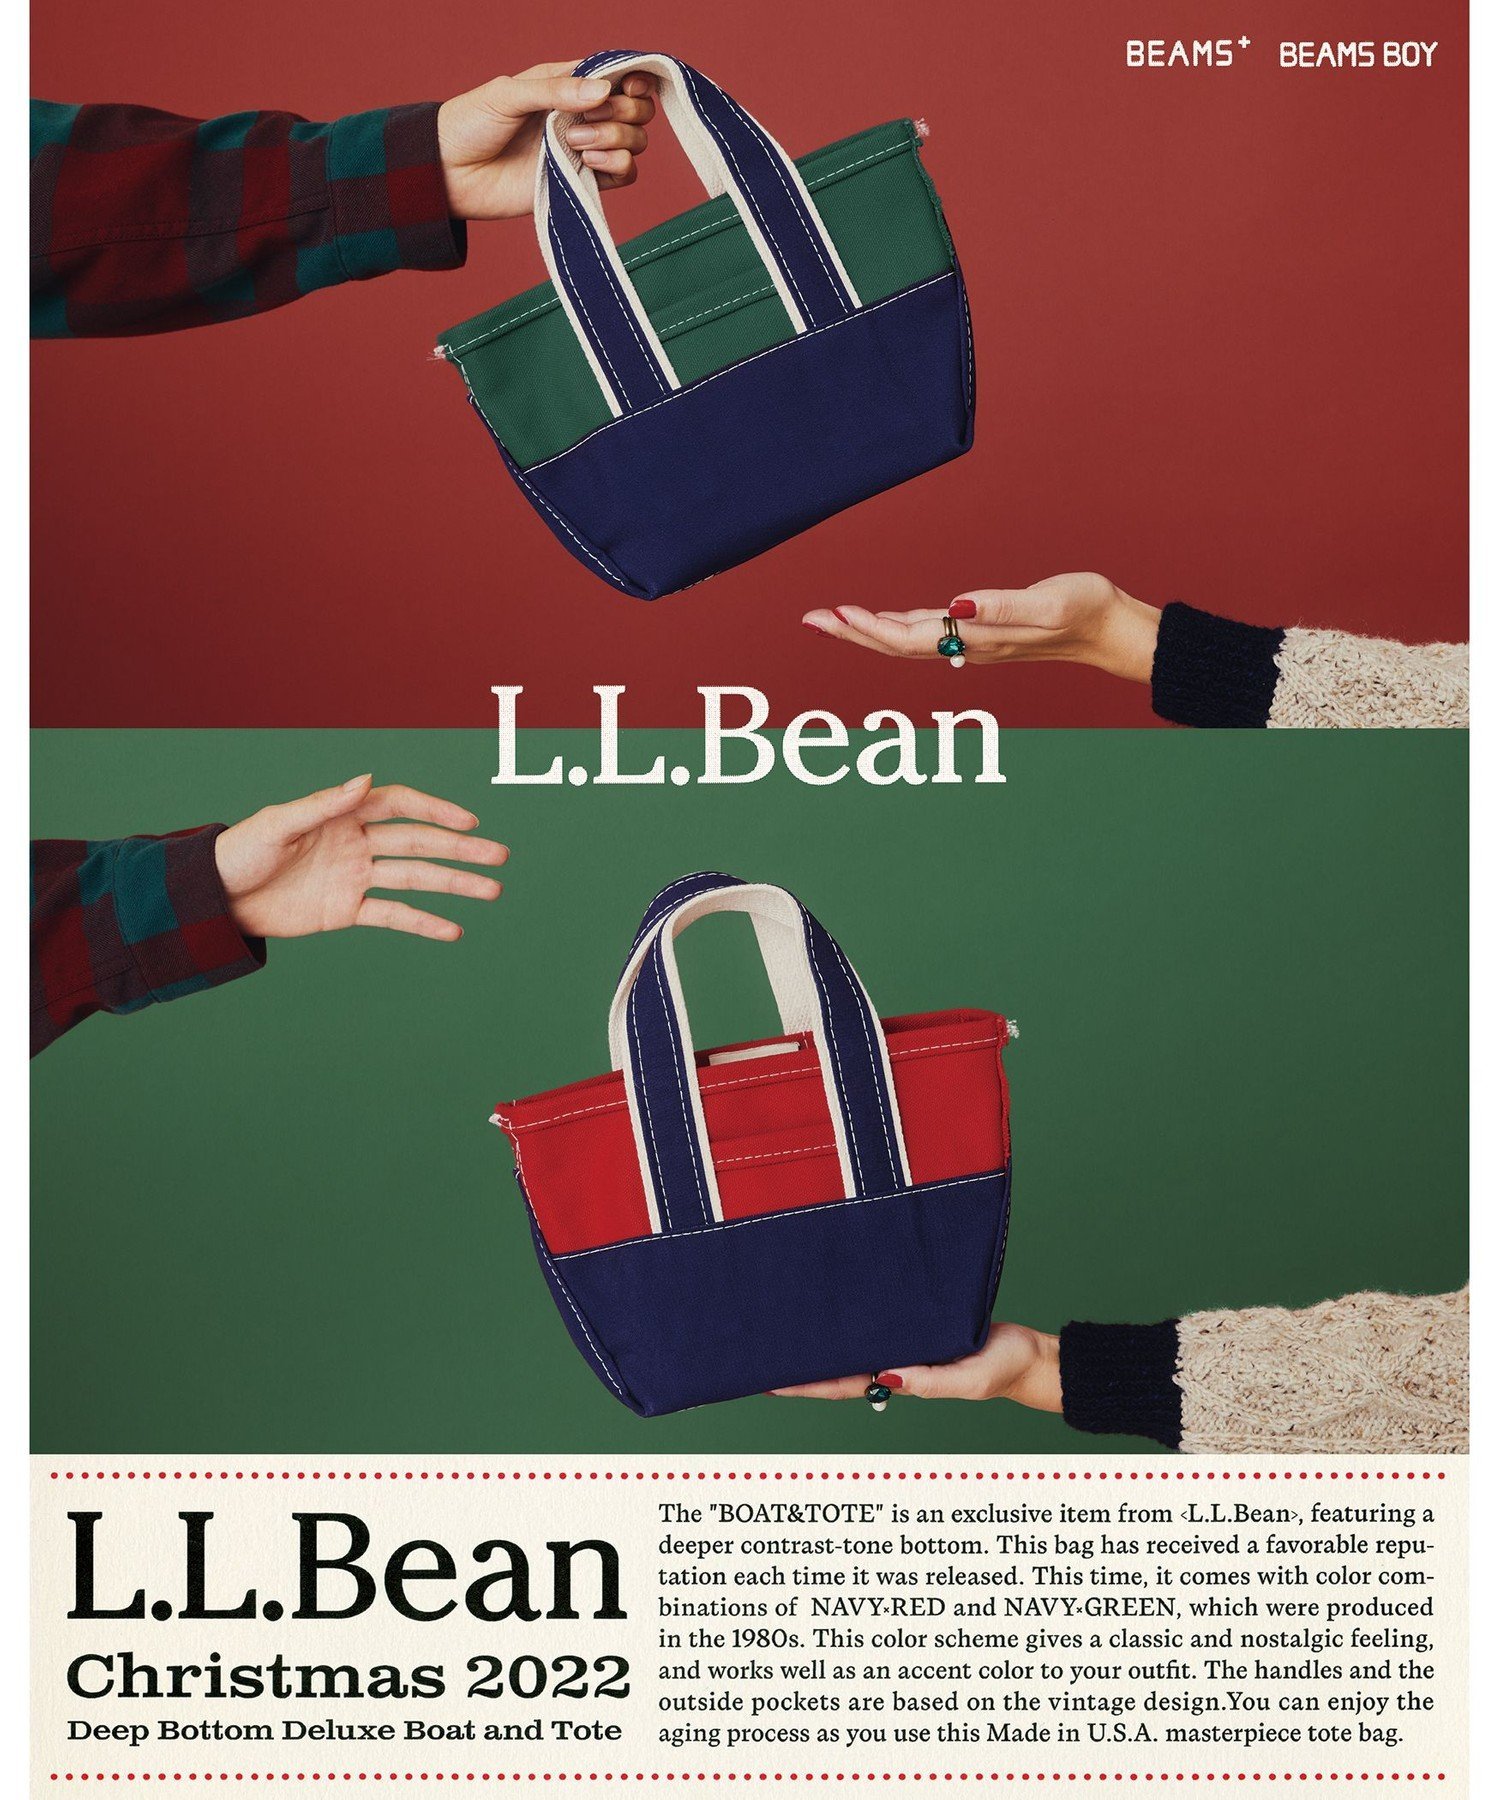 L.L.Bean * BEAMS PLUS & BEAMS BOY / 別注 Deep Bottom Deluxe Boat and Tote XL